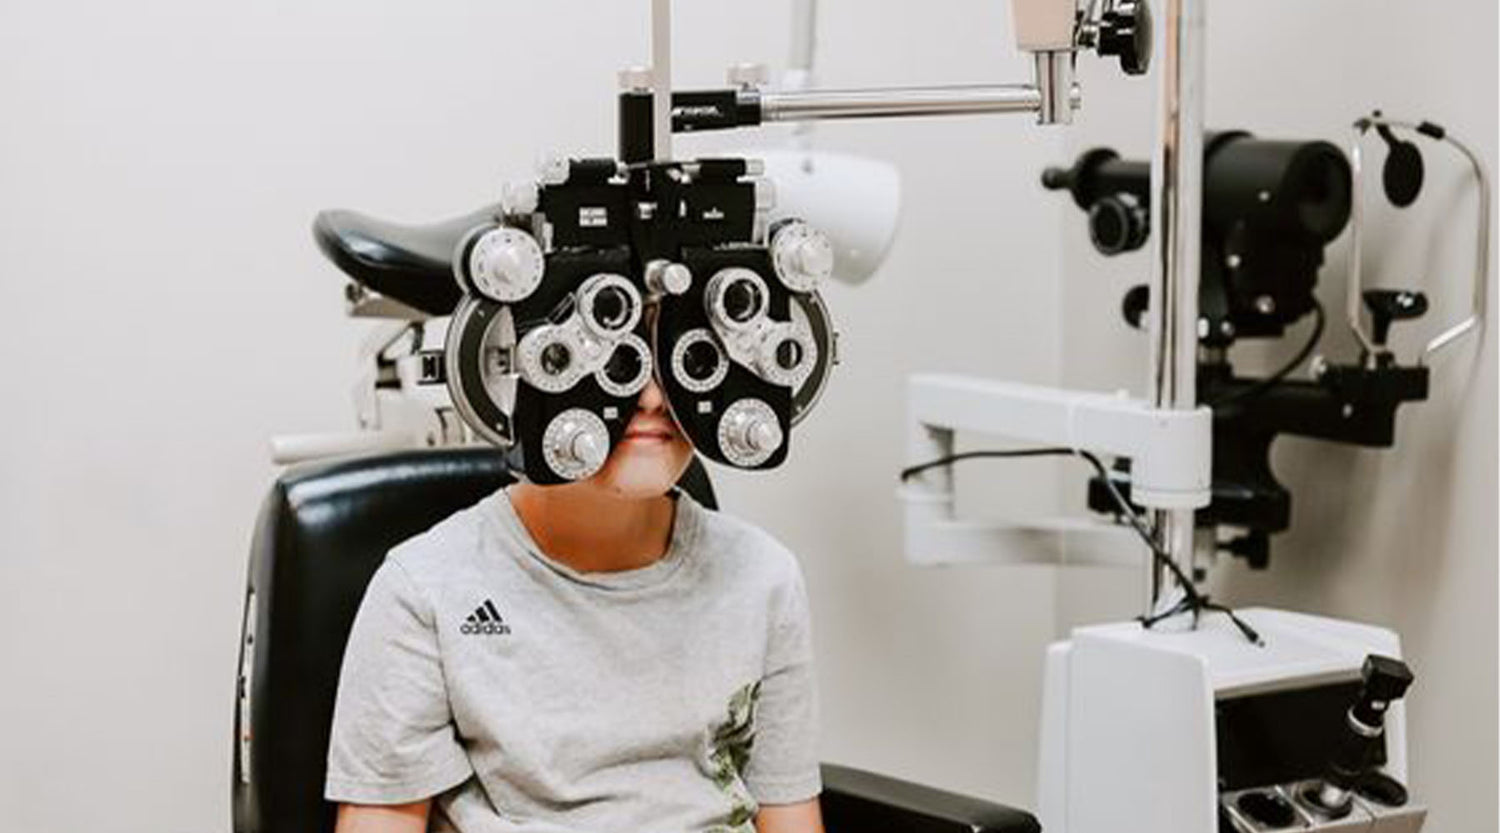 "The Importance of Regular Vision Checks for Children: Ensuring Optimal Health, Safety, and Academic Performance"